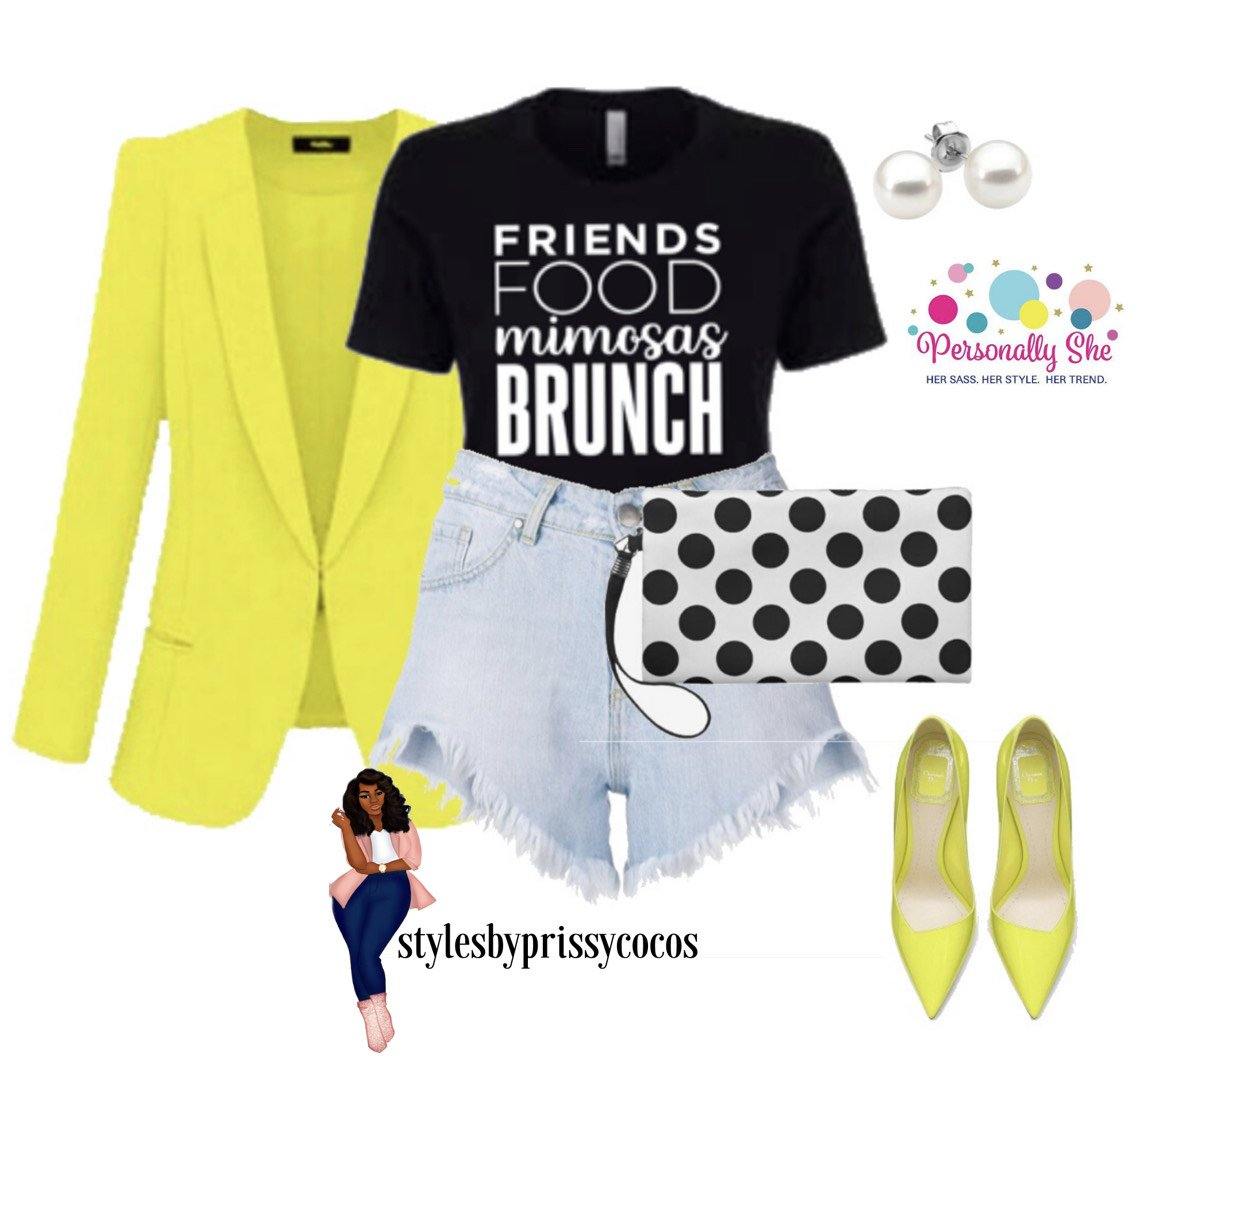 Brunch Outfit - Friends Food Mimosas Brunch tee